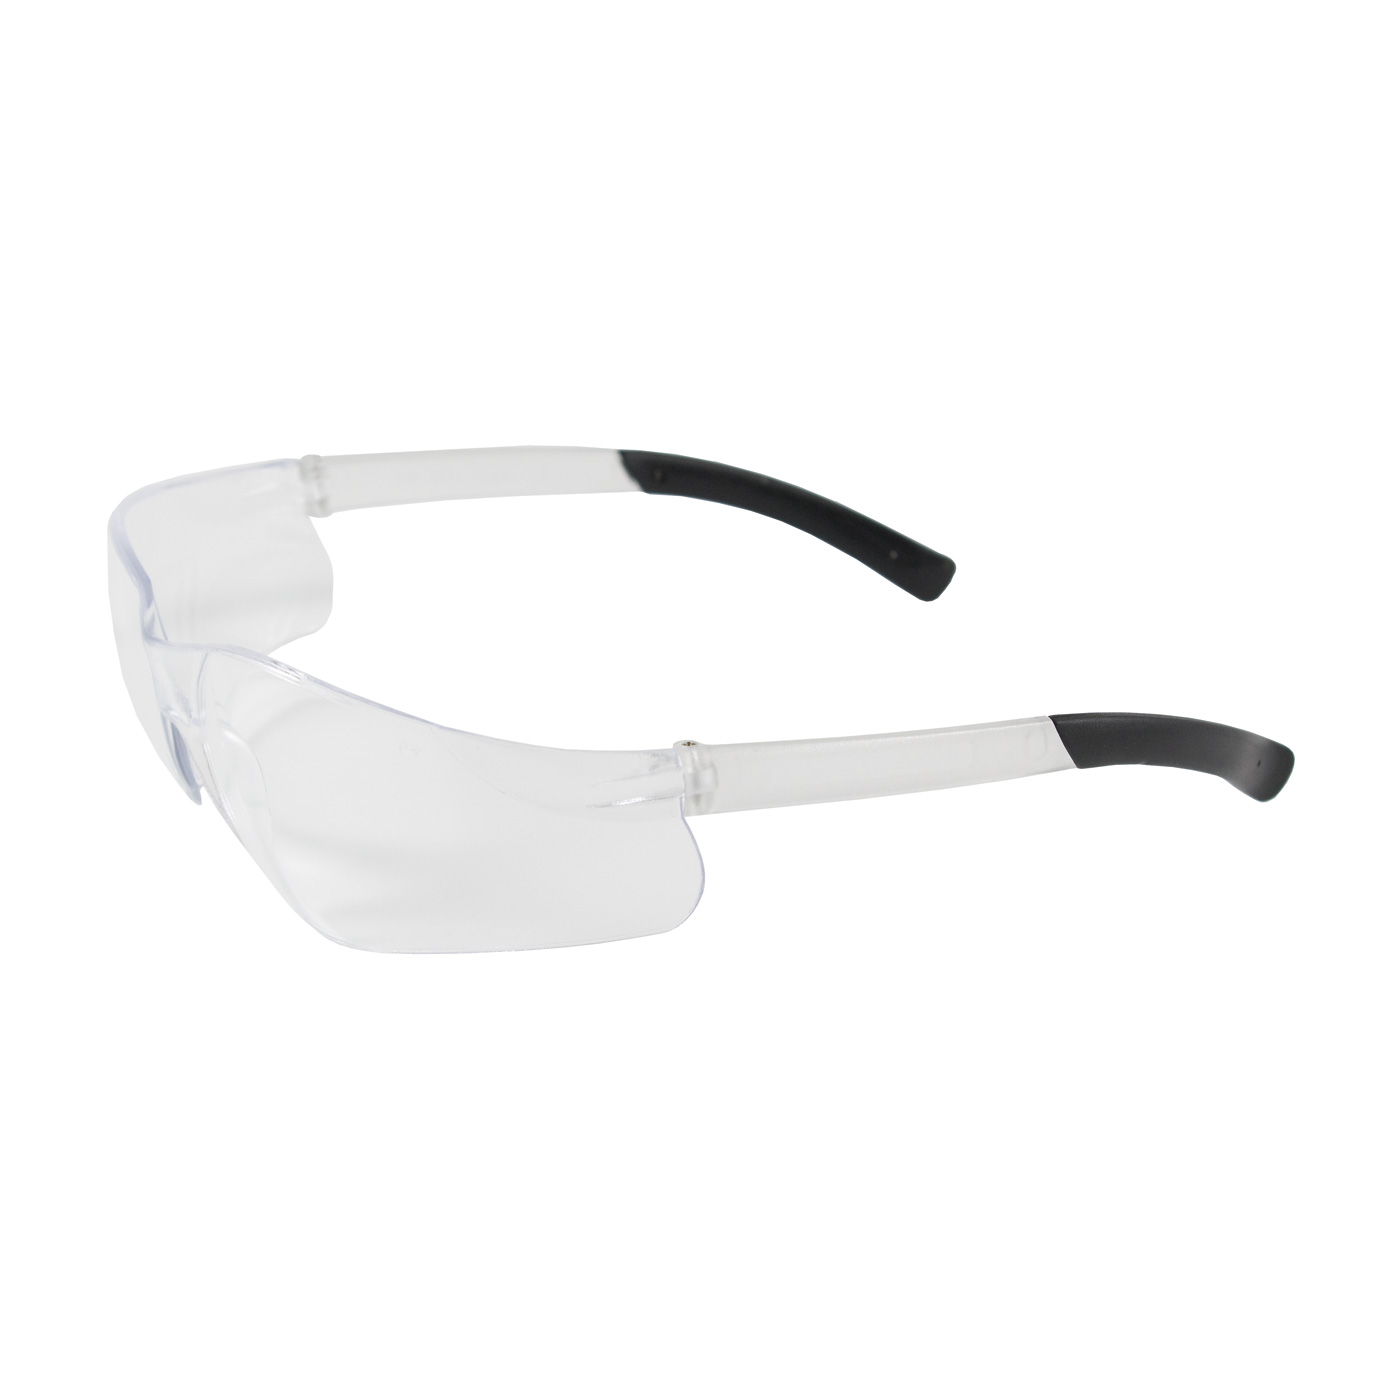 PIP 250-06-0000 Zenon Z13 Rimless Safety Glasses with Clear Temple, Clear Lens and Anti-Scratch Coating PID-250 06 0000